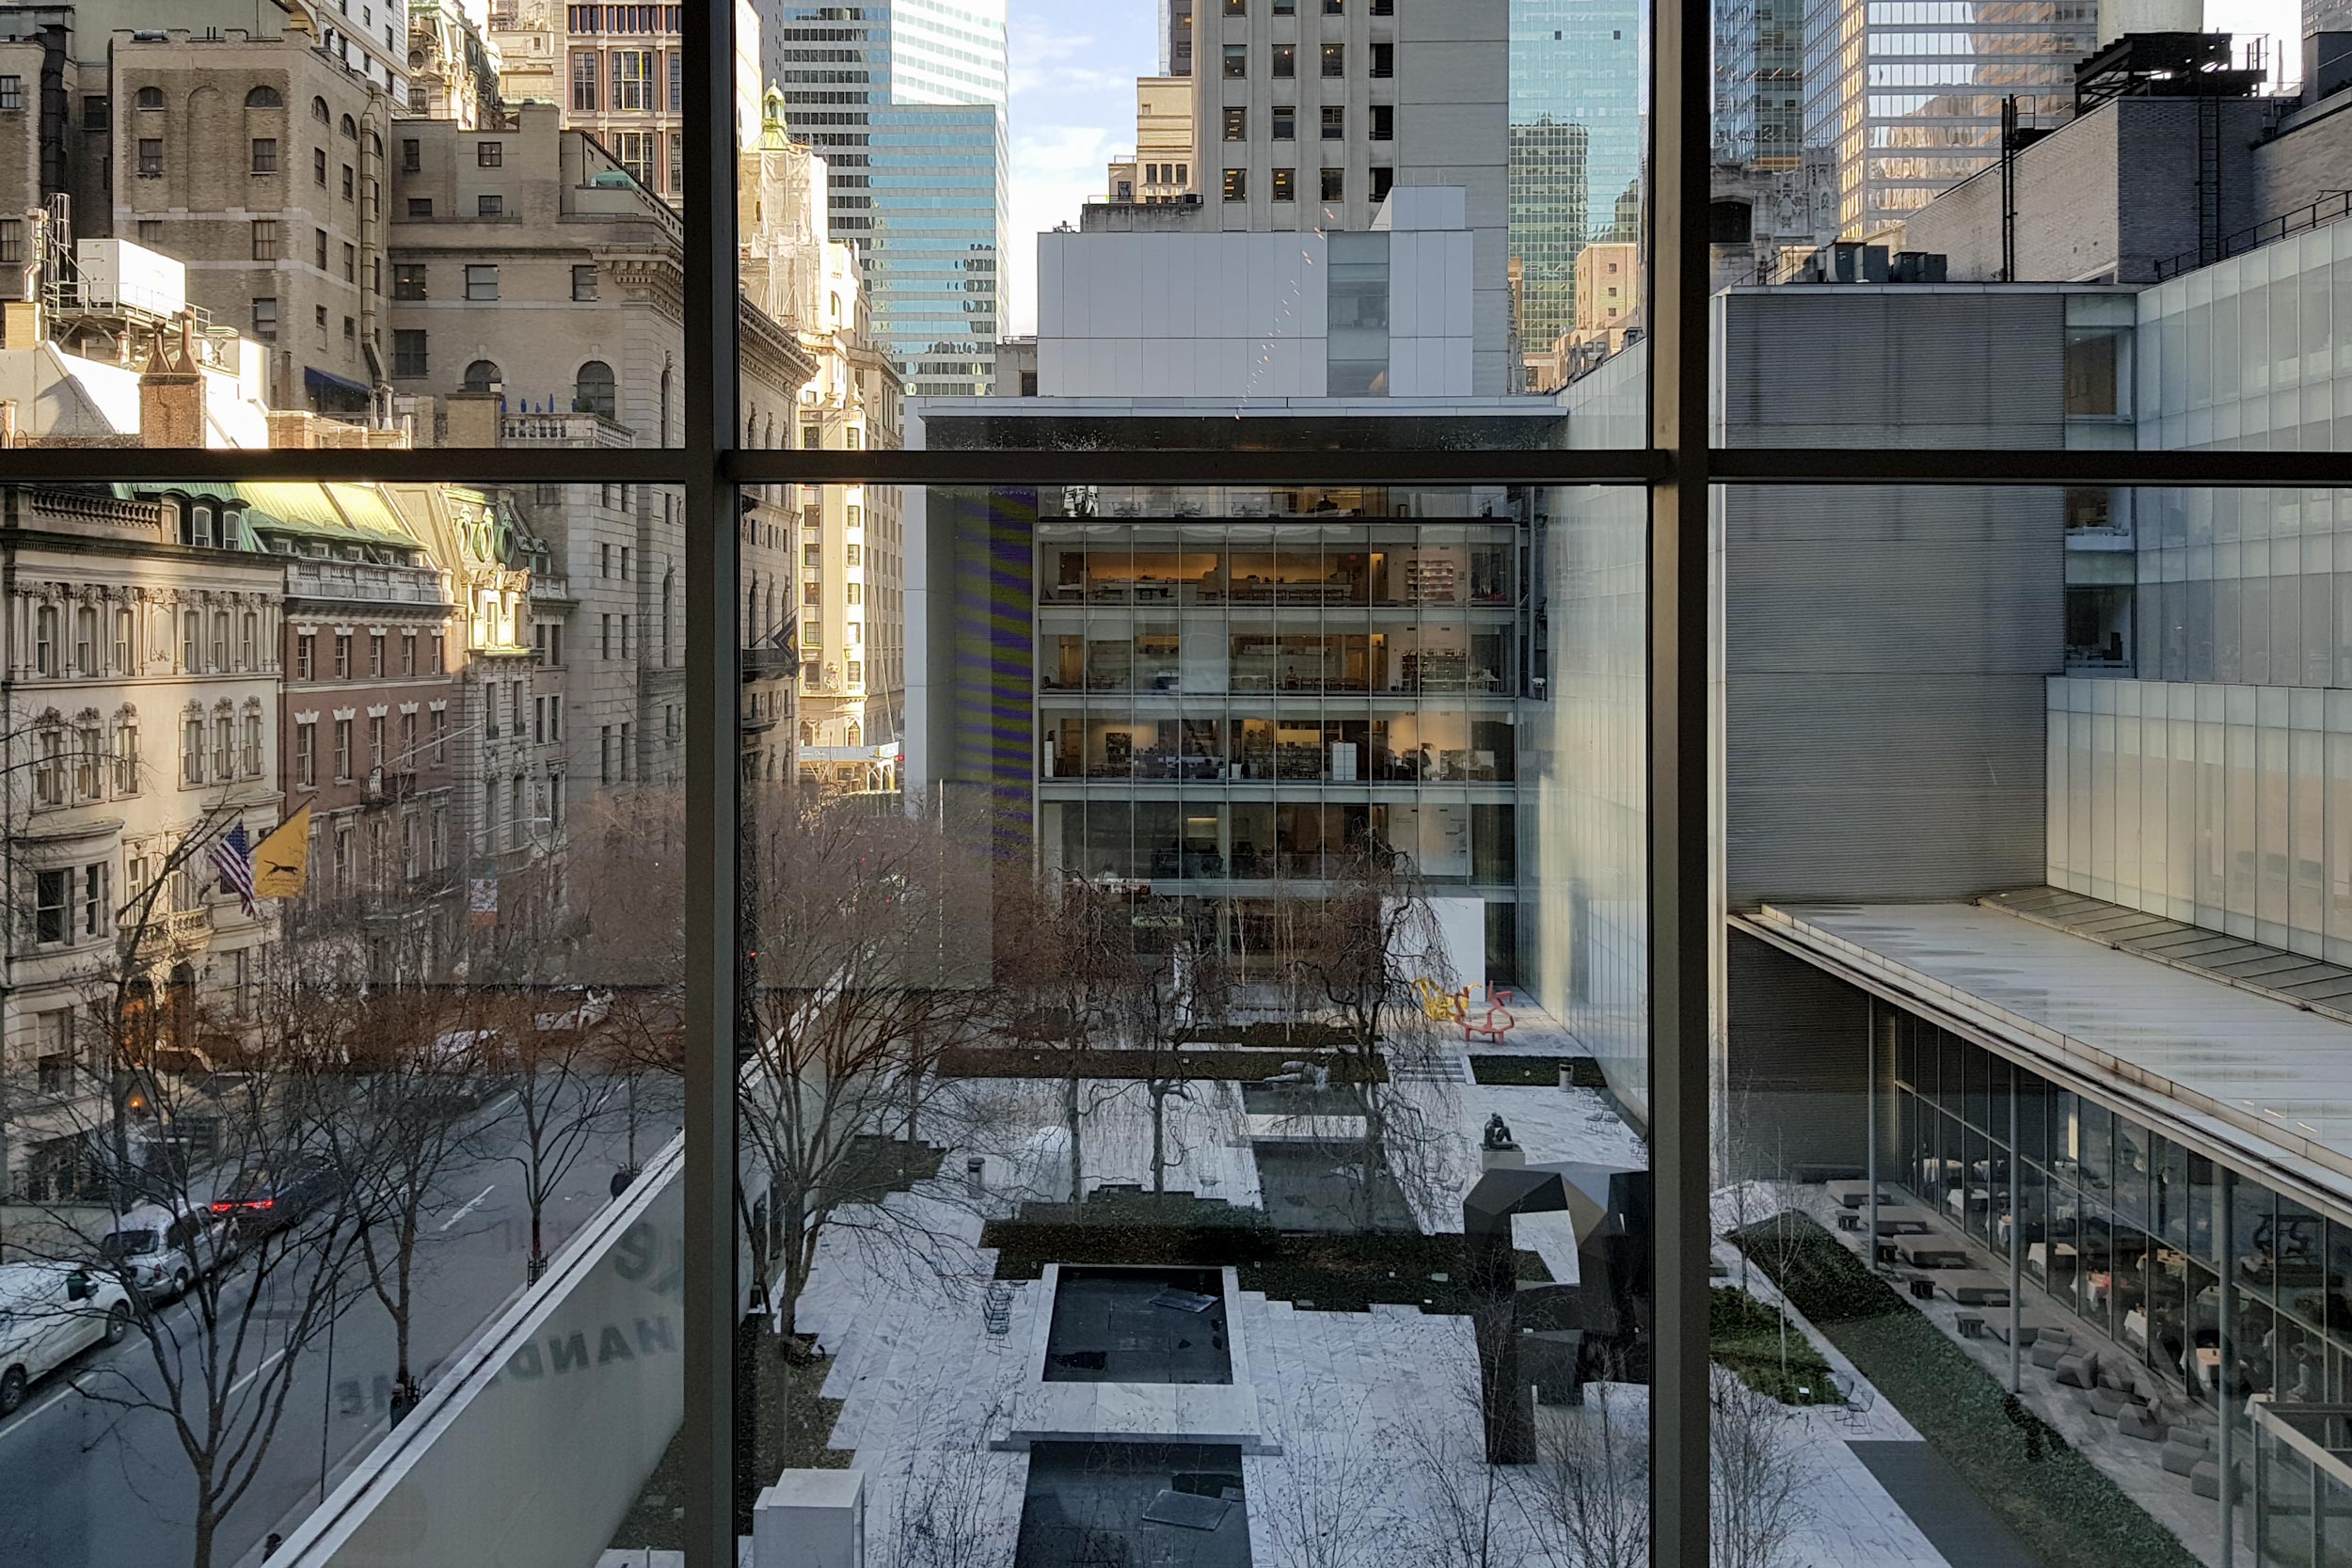 Looking out a window to the Moma Sculpture garden in Manhattan